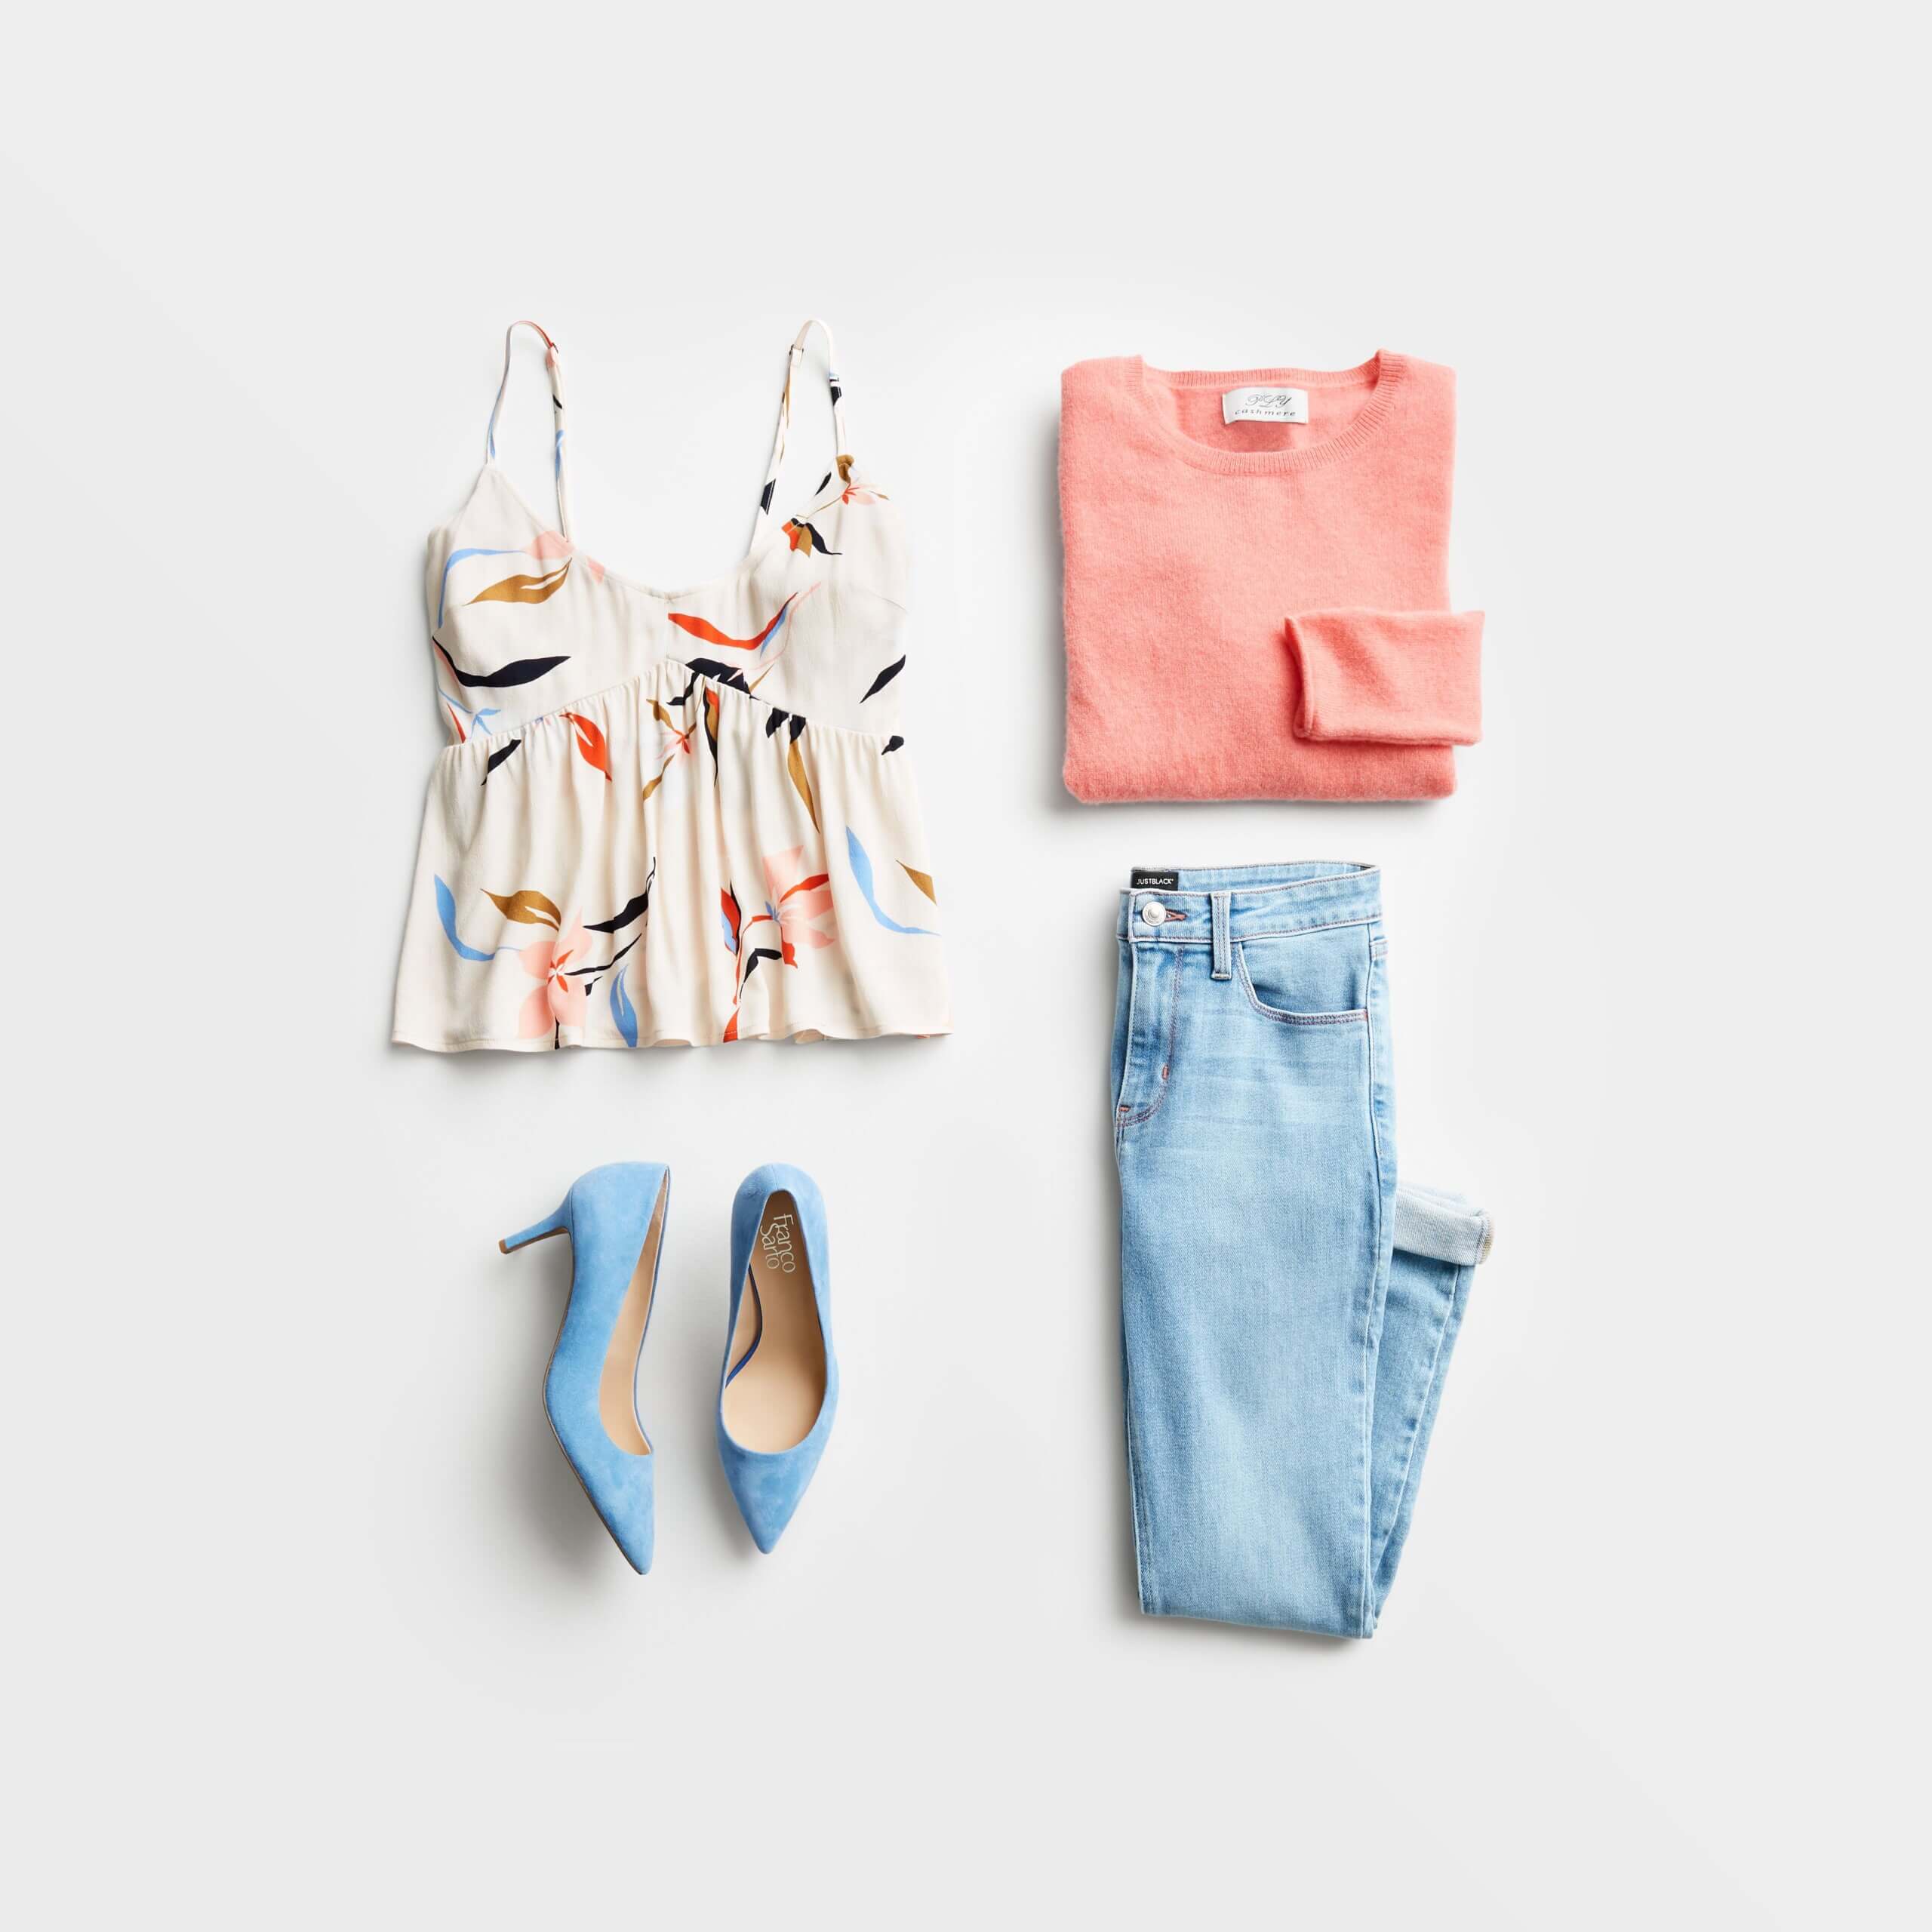 Stitch Fix Women’s date night at home featuring blue jeans, white patterned tank, peach sweater and light blue heels.